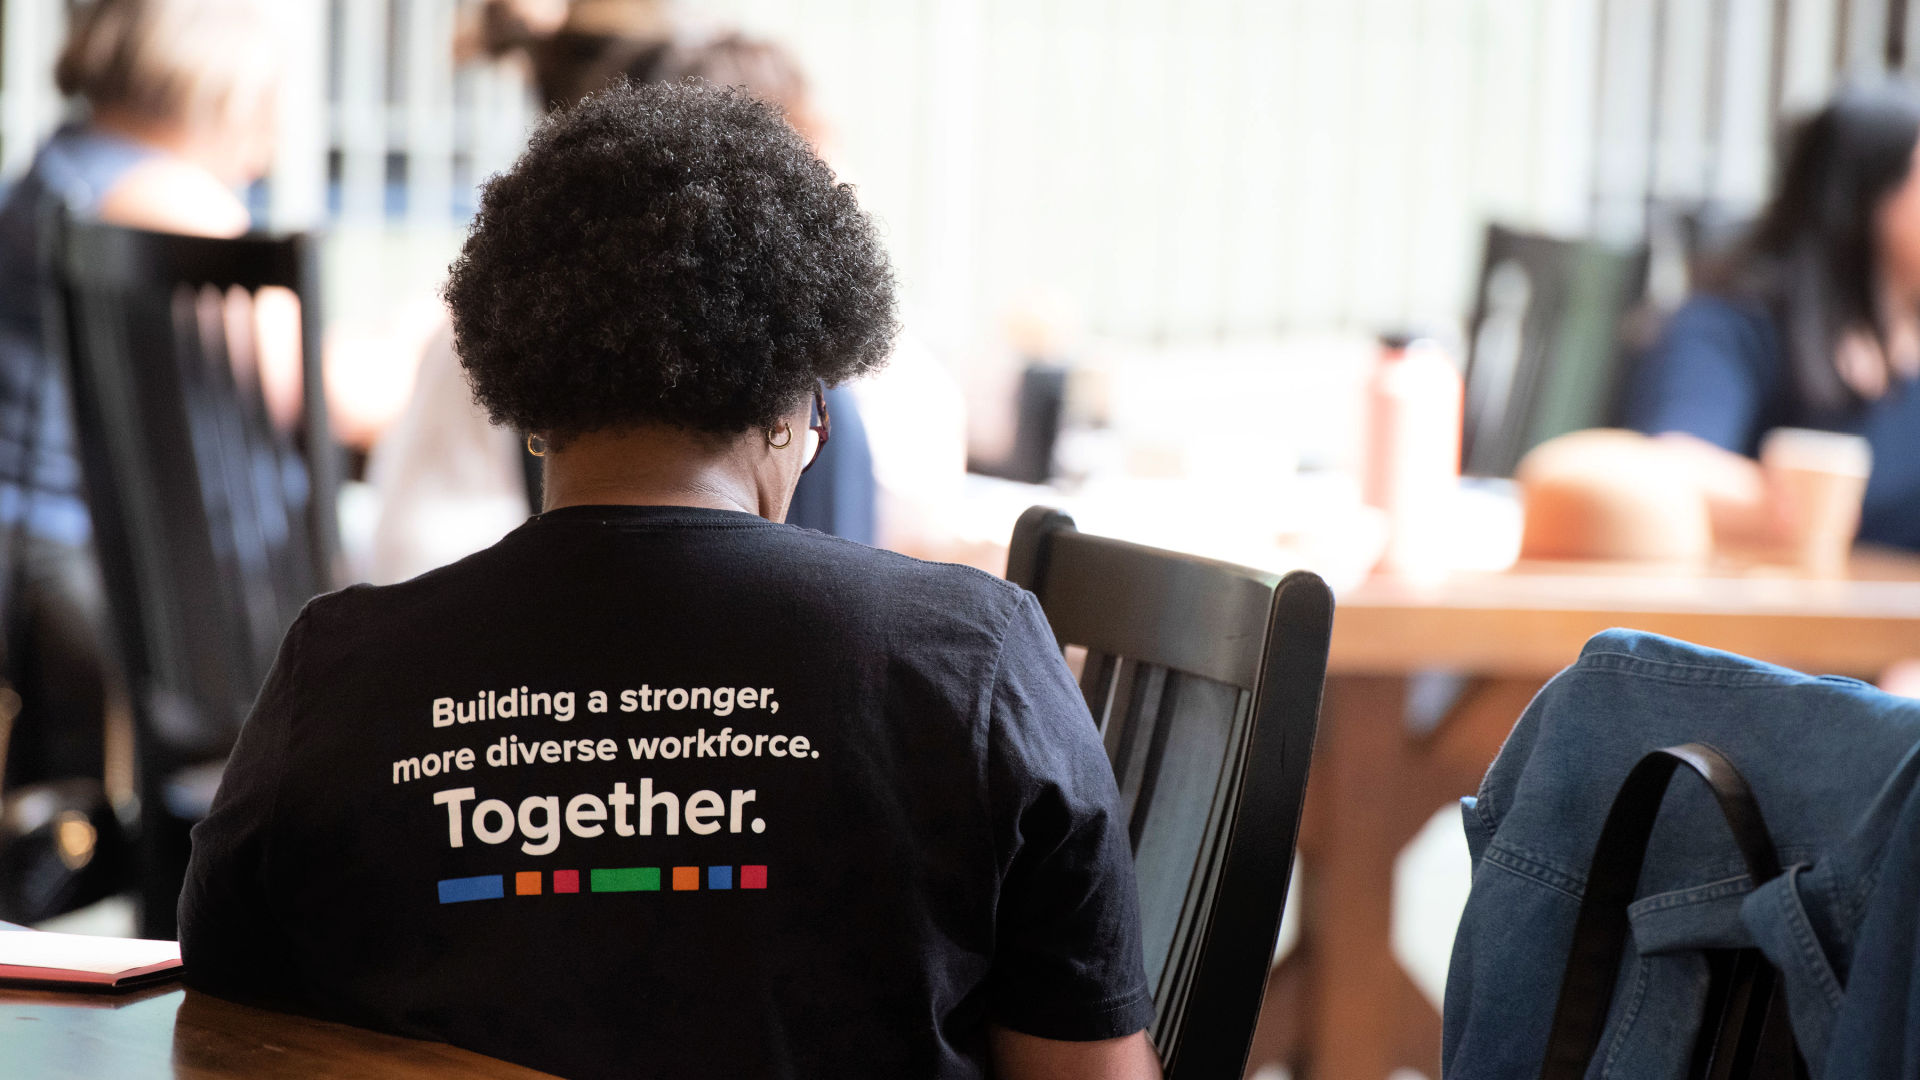 A Dialogues attendee's shirt reads, "Building a stronger, more diverse work force together."